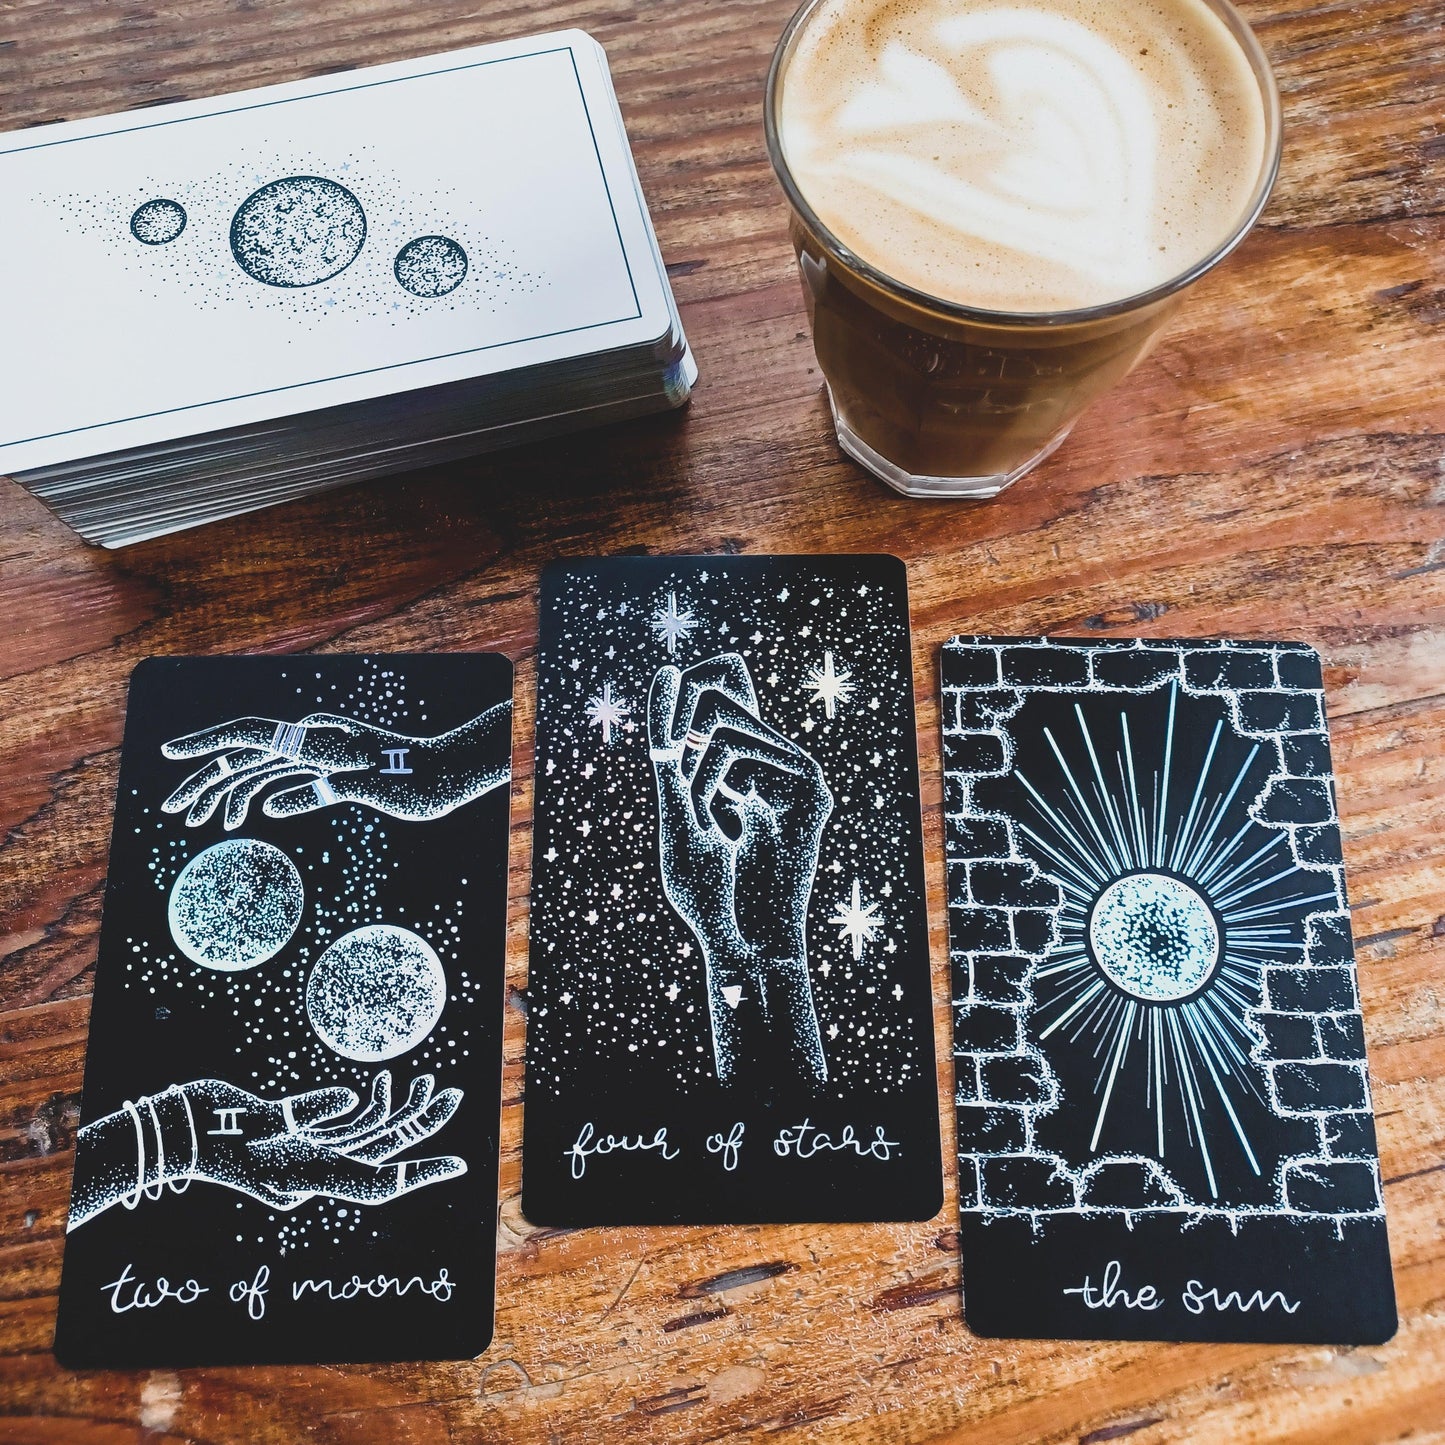 coffee cup with tarot cards from Midnight Sky indie deck on wooden surface